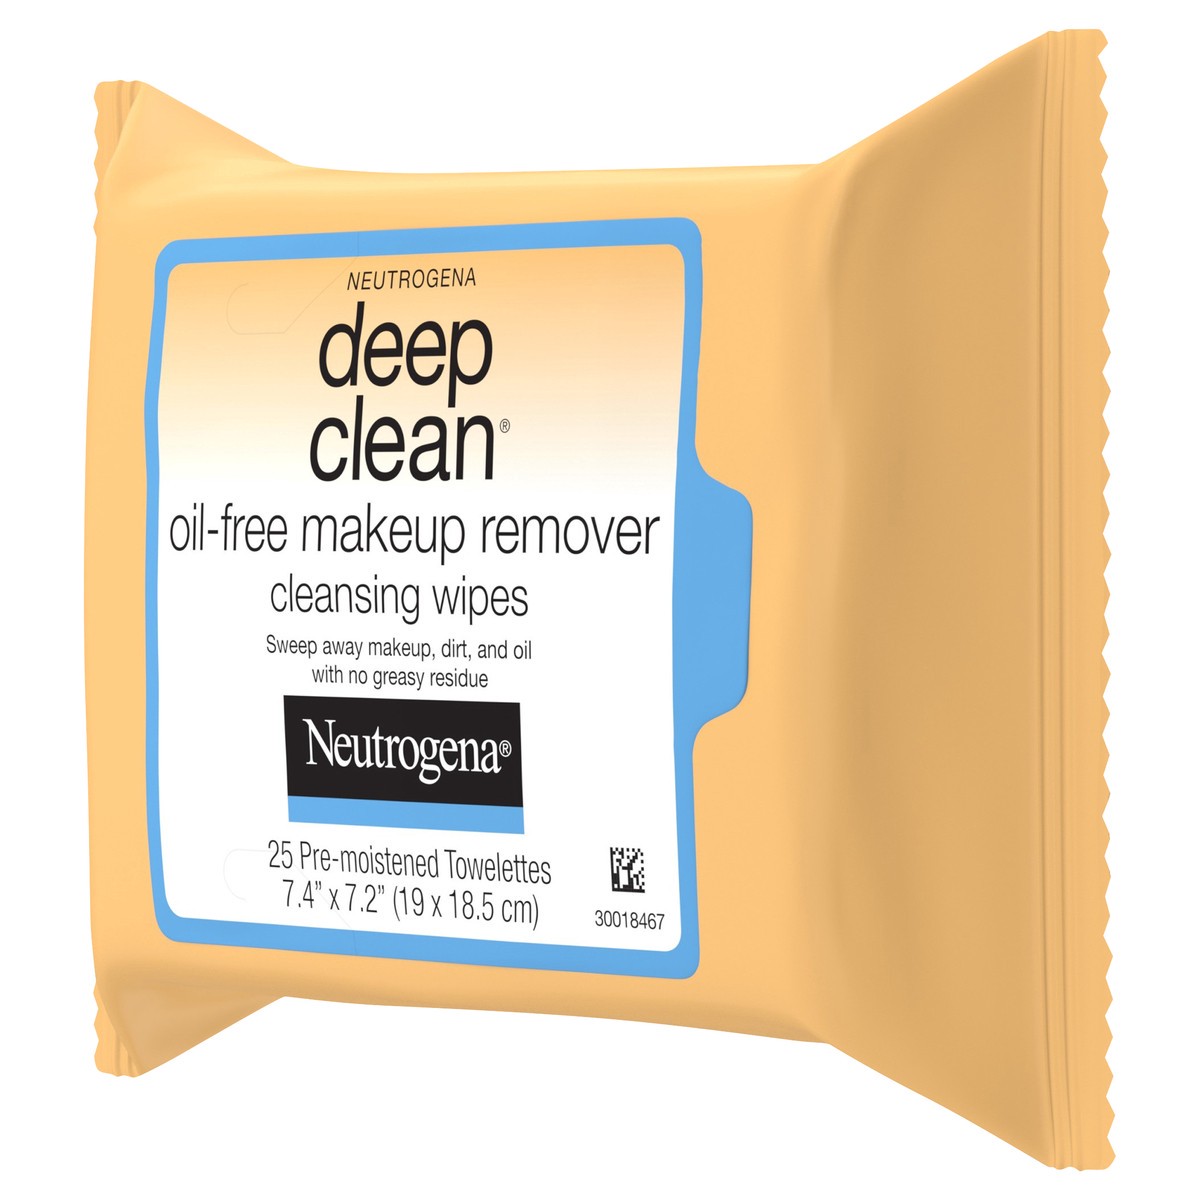 slide 4 of 9, Neutrogena Deep Clean Oil-Free Makeup Remover Cleansing Face Wipes, Daily Cleansing Towelettes to Remove Dirt, Oil, and Makeup, 25 ct, 25 ct